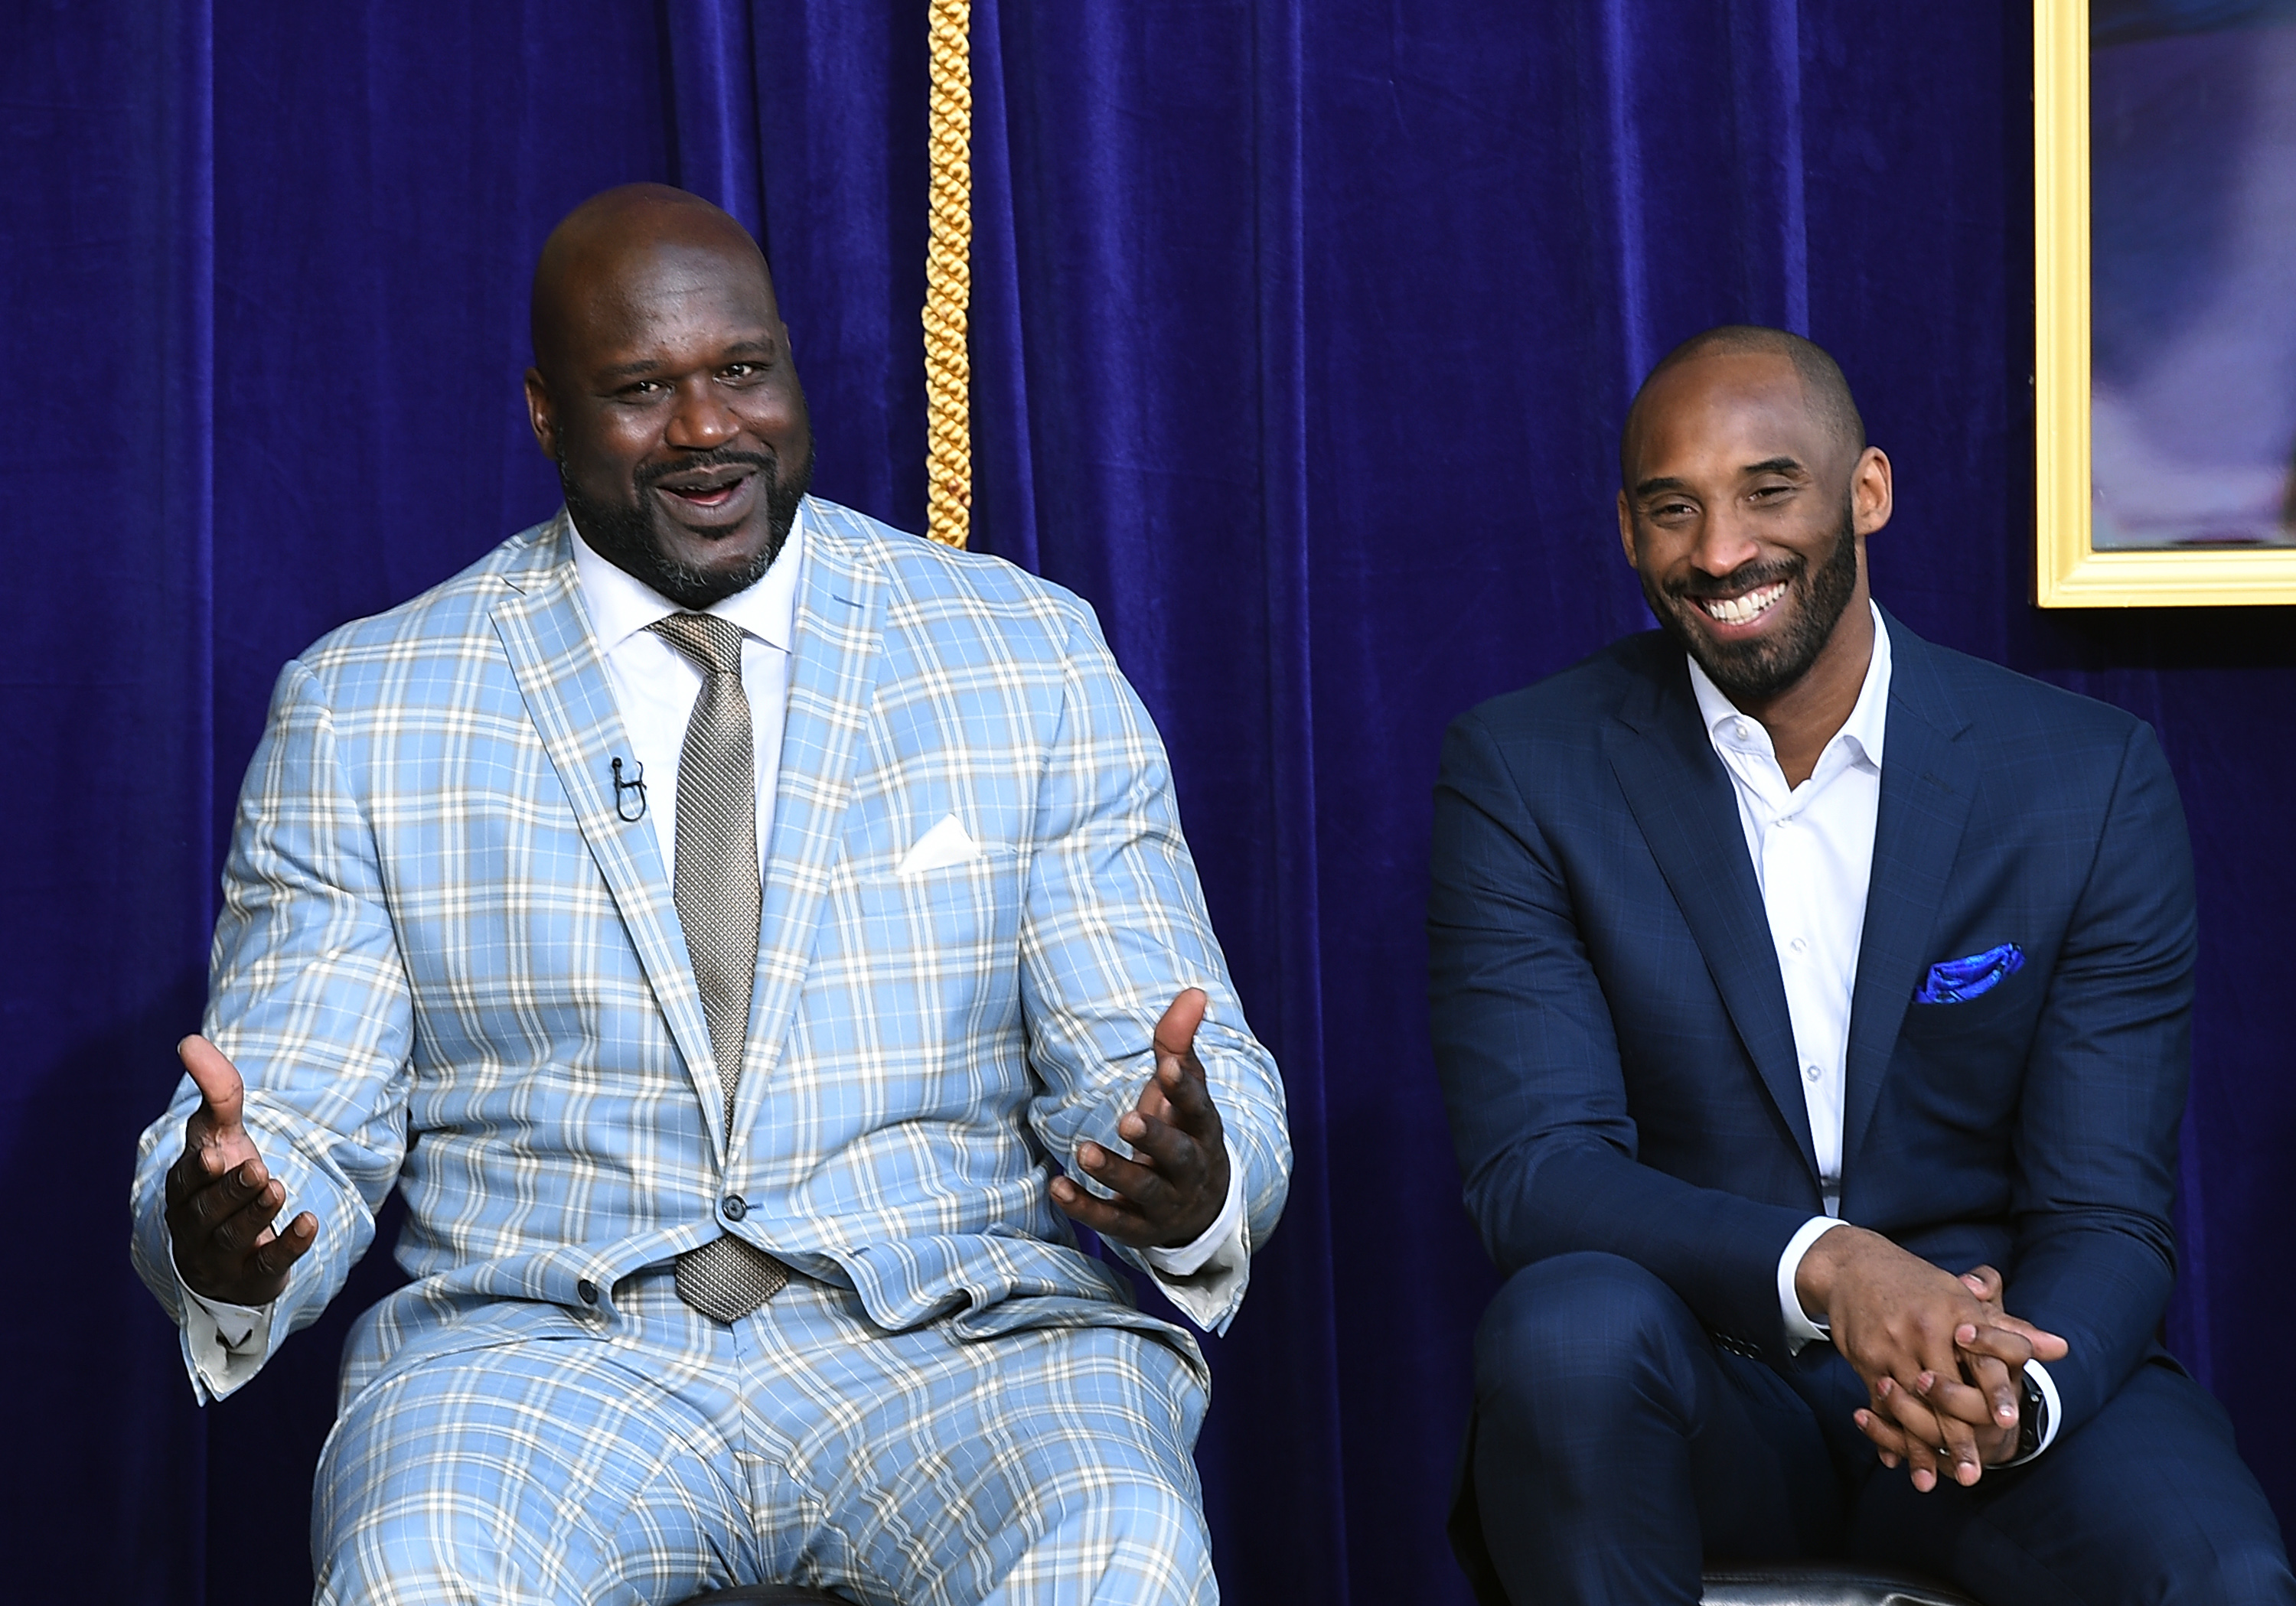 Shaquille O'Neal and Kobe Bryant at the unveiling of Shaq's statue at Staples Center in 2017